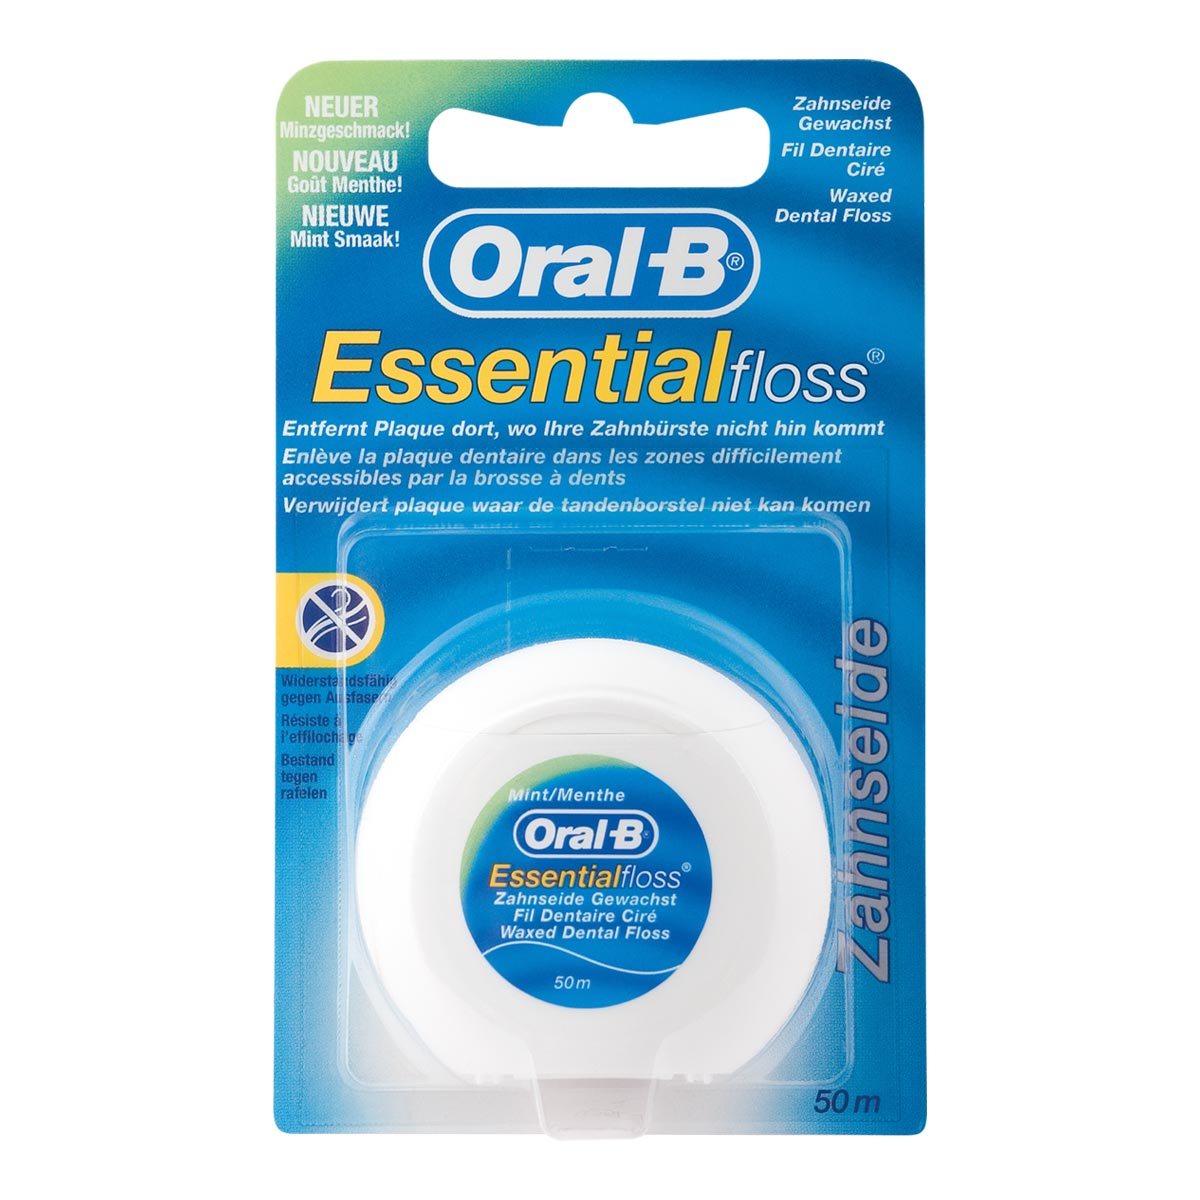 Oral-B Essential Floss fil dentaire undefined